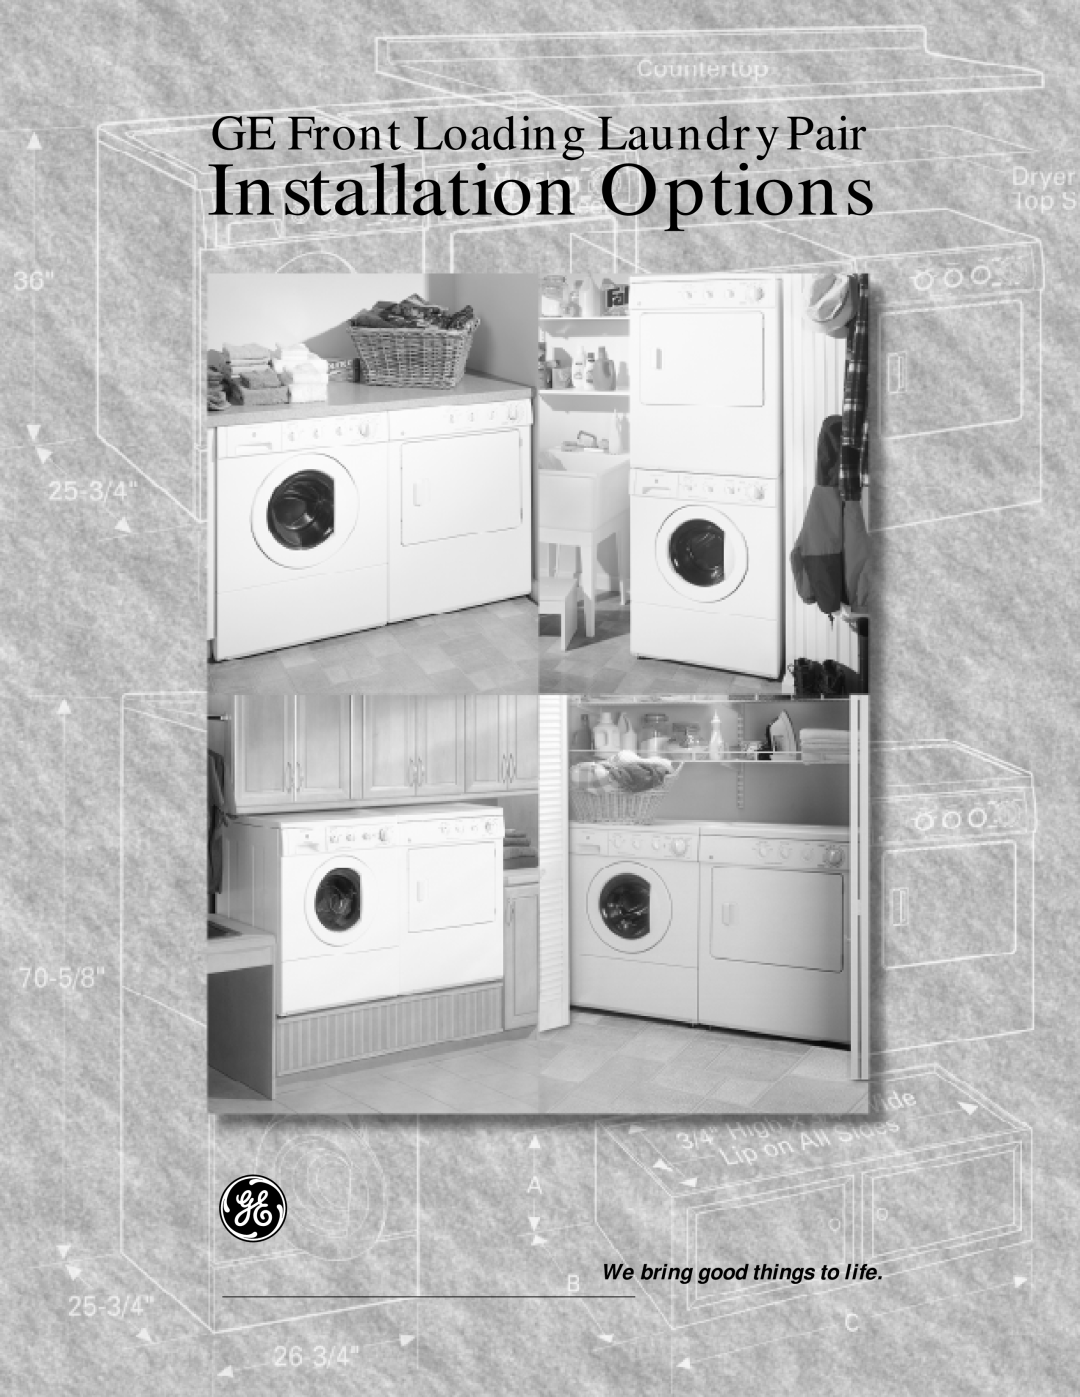 GE 14-A037, 14-A008, 14-T029 manual Installation Options, GE Front Loading Laundry Pair, We bring good things to life 